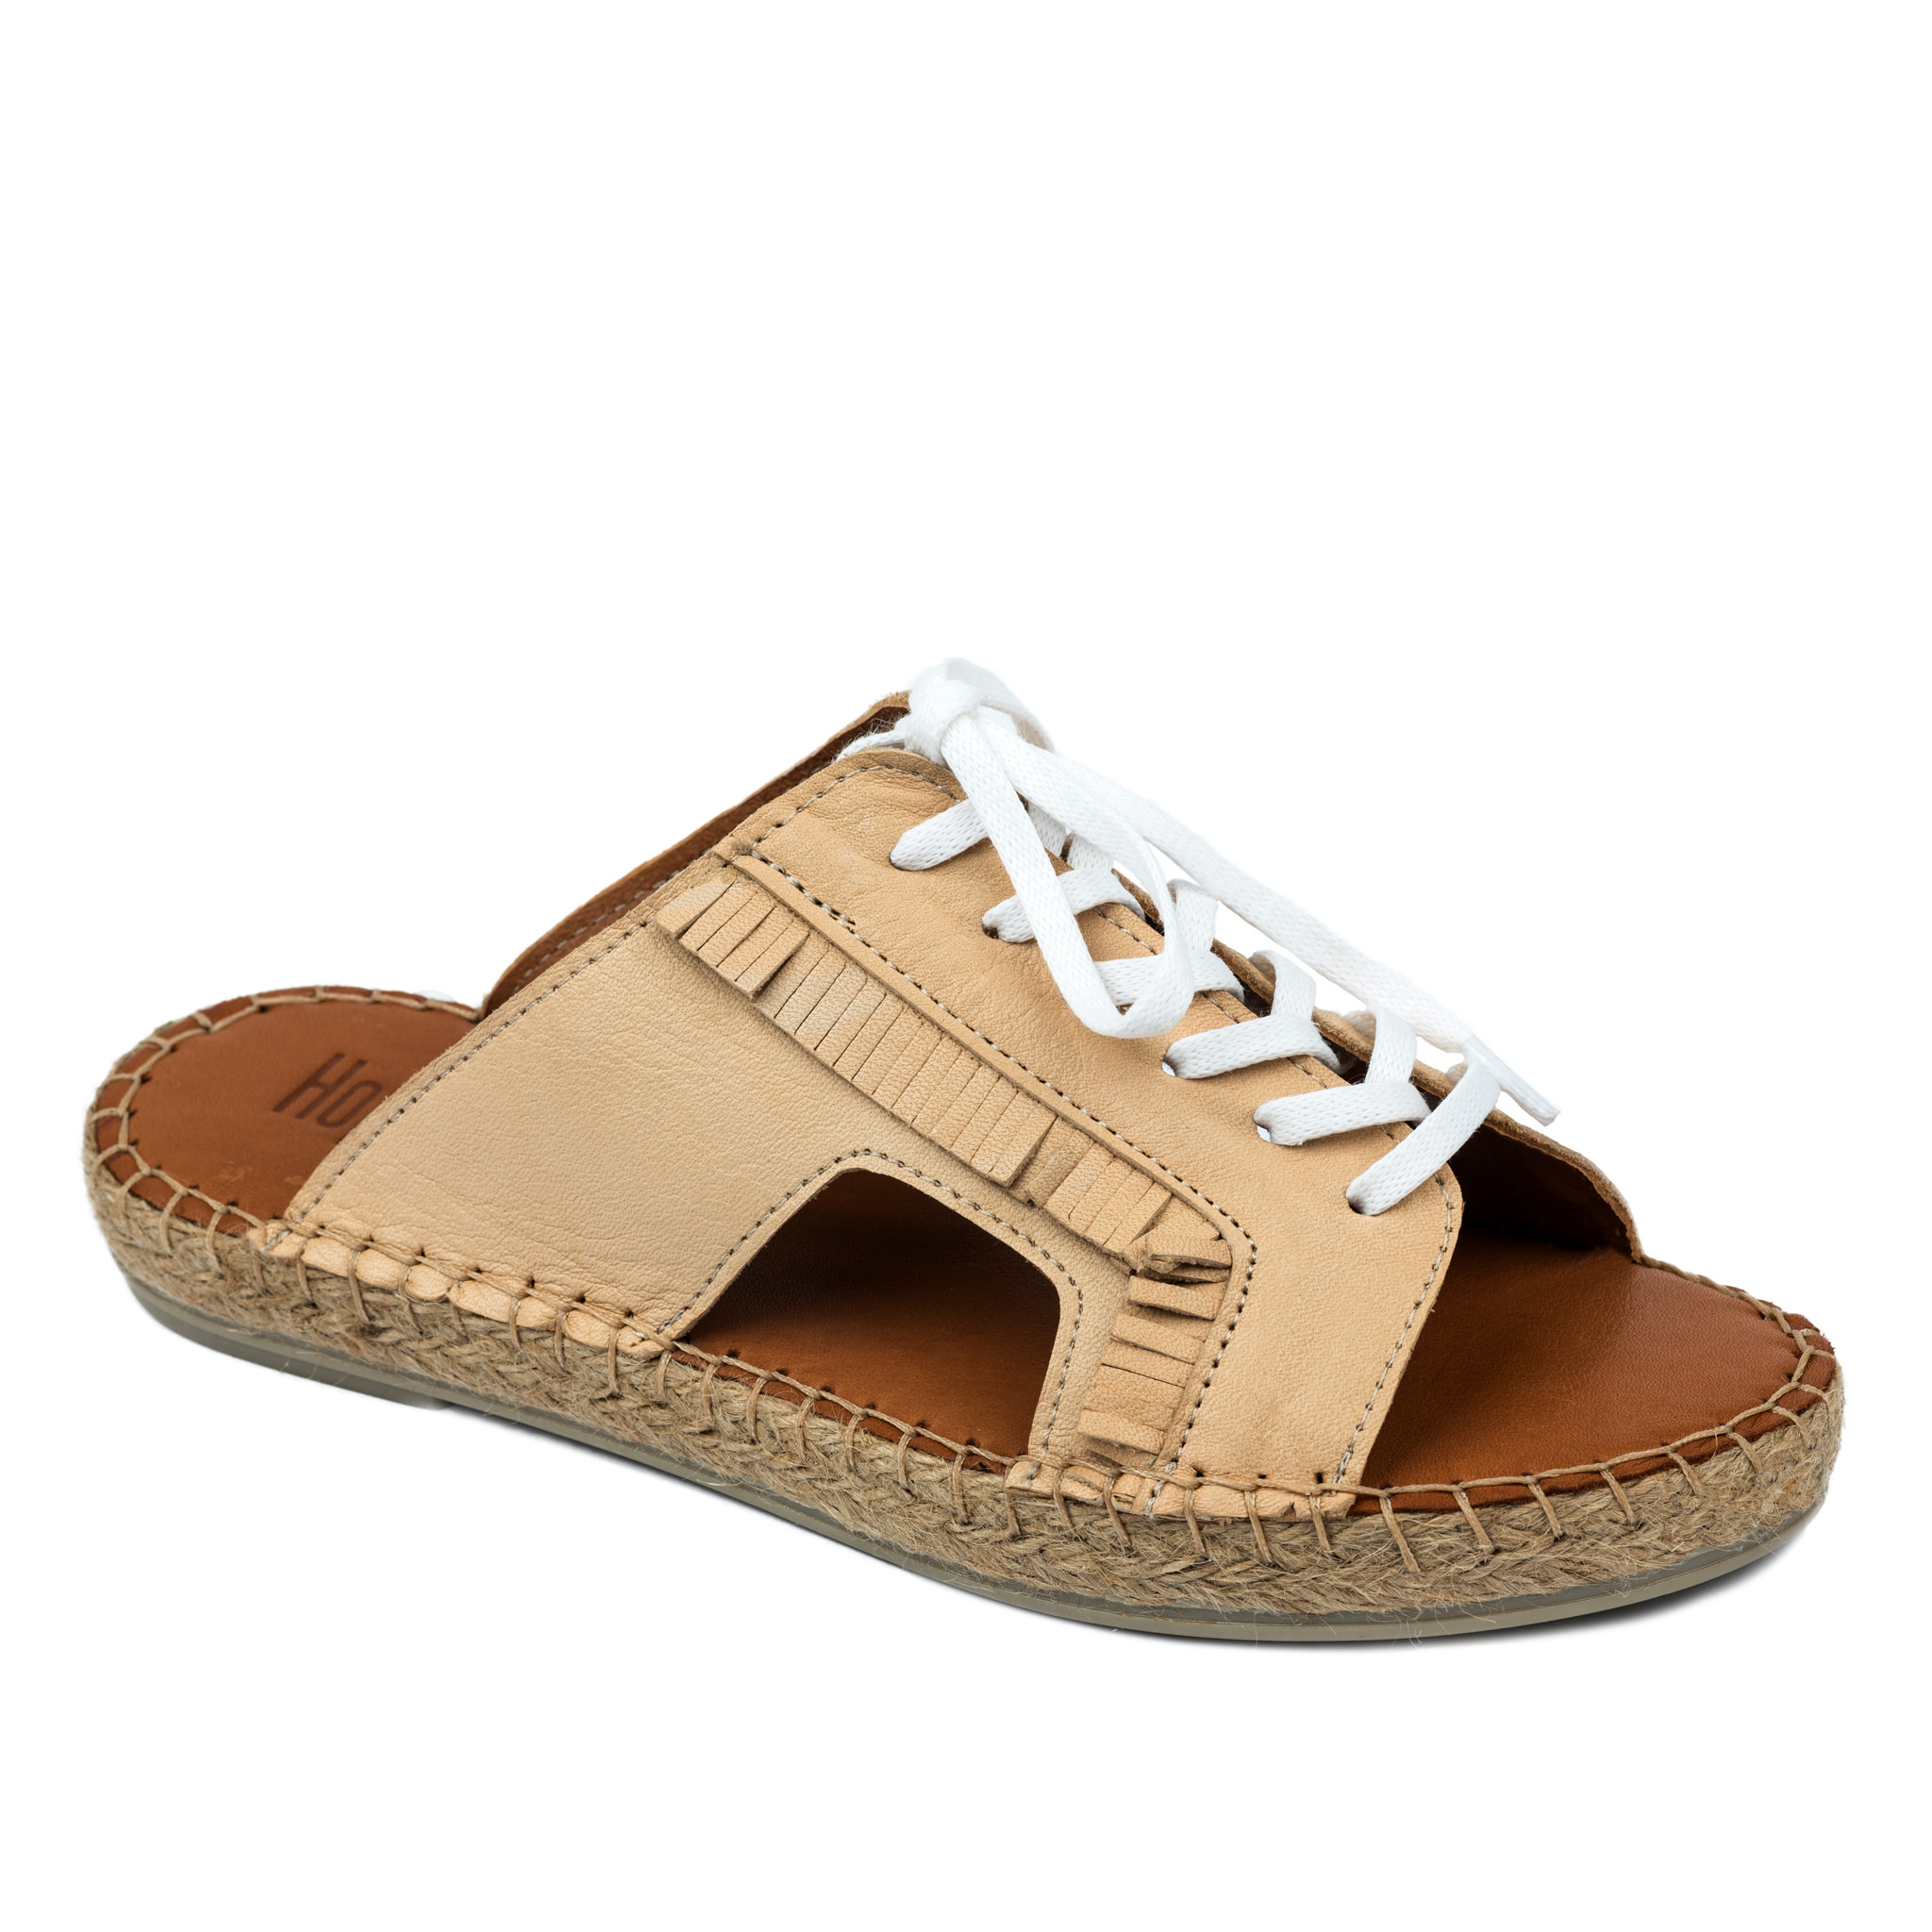 Leather slippers REEVI - BEIGE